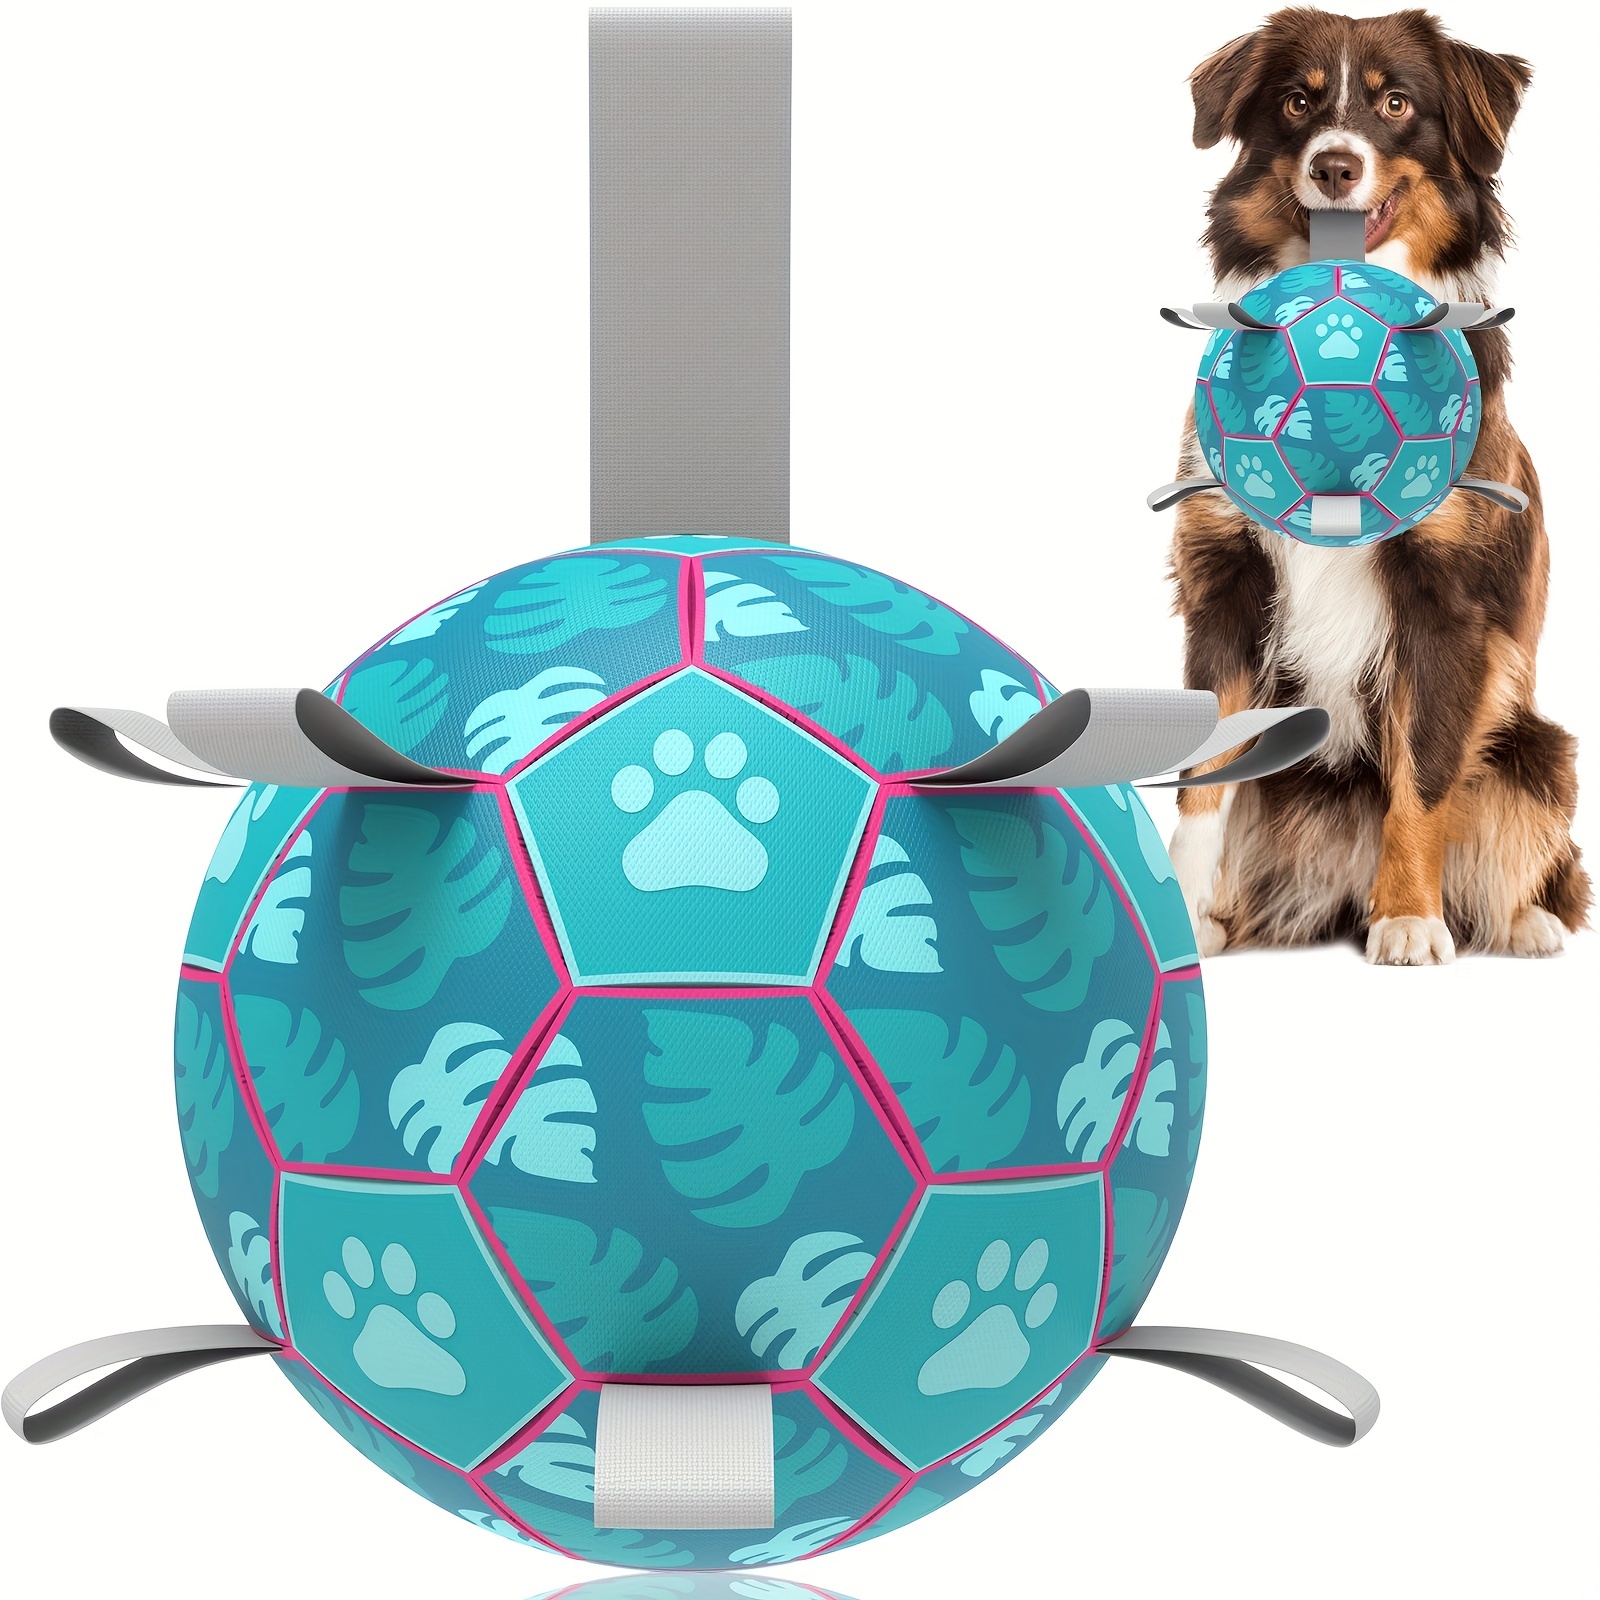 

1pc Durable Football Design Pet Toy With Straps Dog Chewing Ball Toy For Training Playing Teeth Cleaning, Interactive Fetch Pet Toy For Small Medium Large Dogs